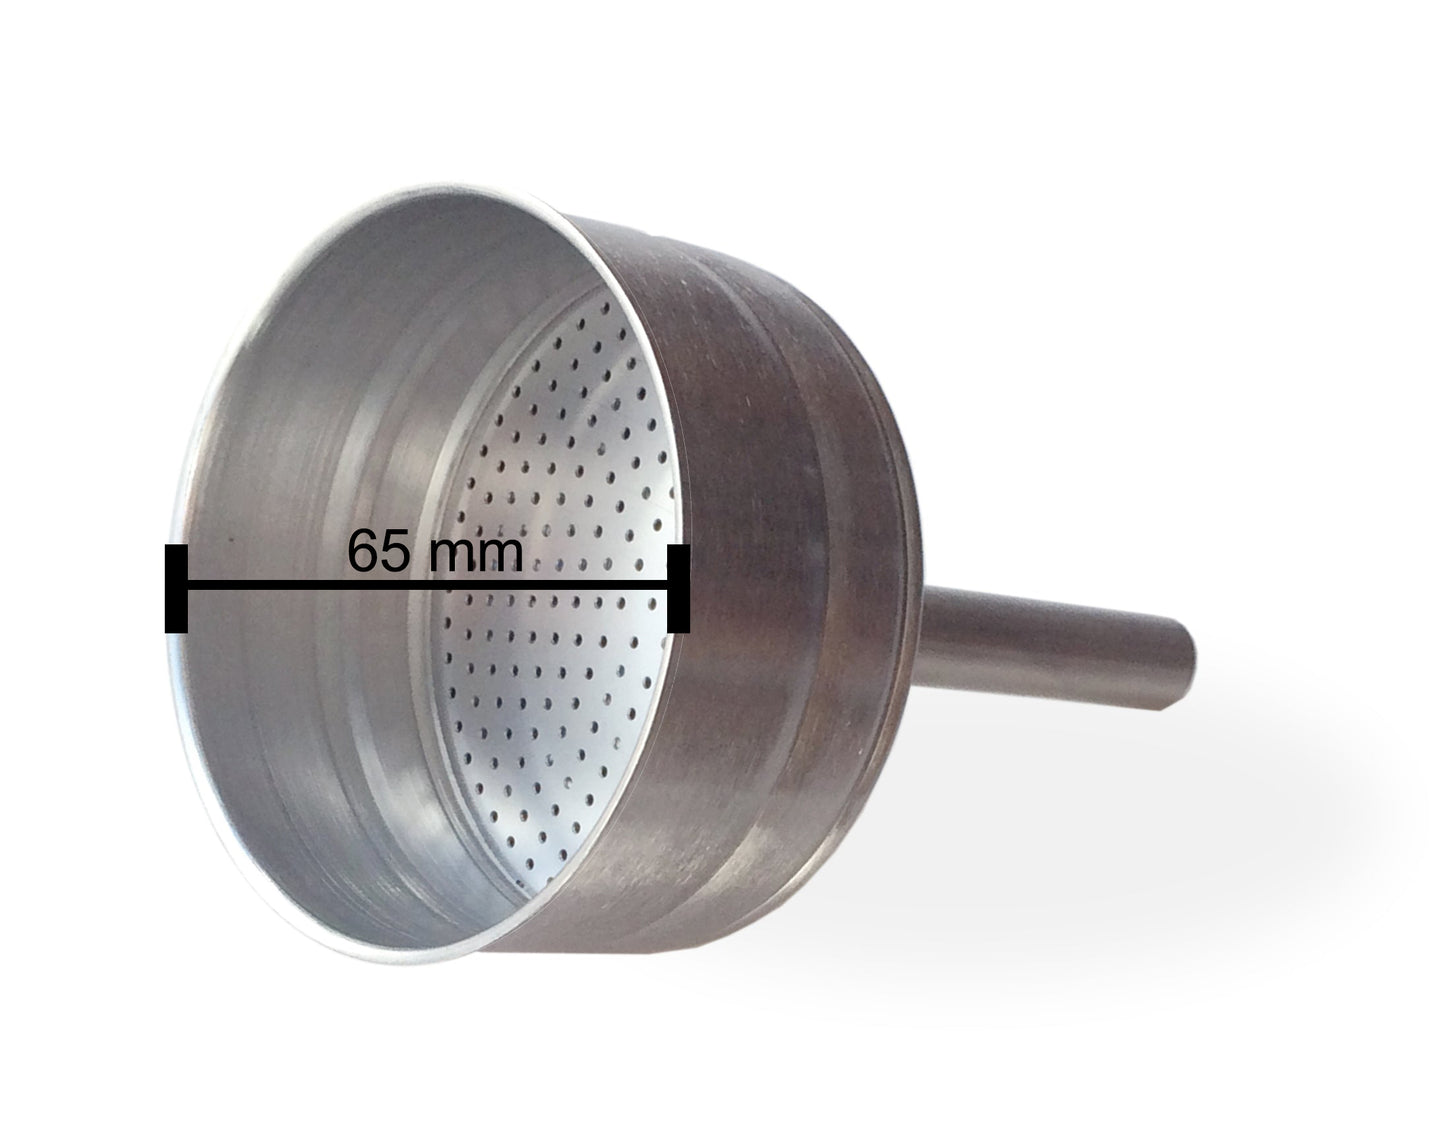 Cuisinox Stainless Steel Funnel Filter for 6 cup Firenza, Roma, Barista, Milano, Liberta, Amore & Bella espresso makers